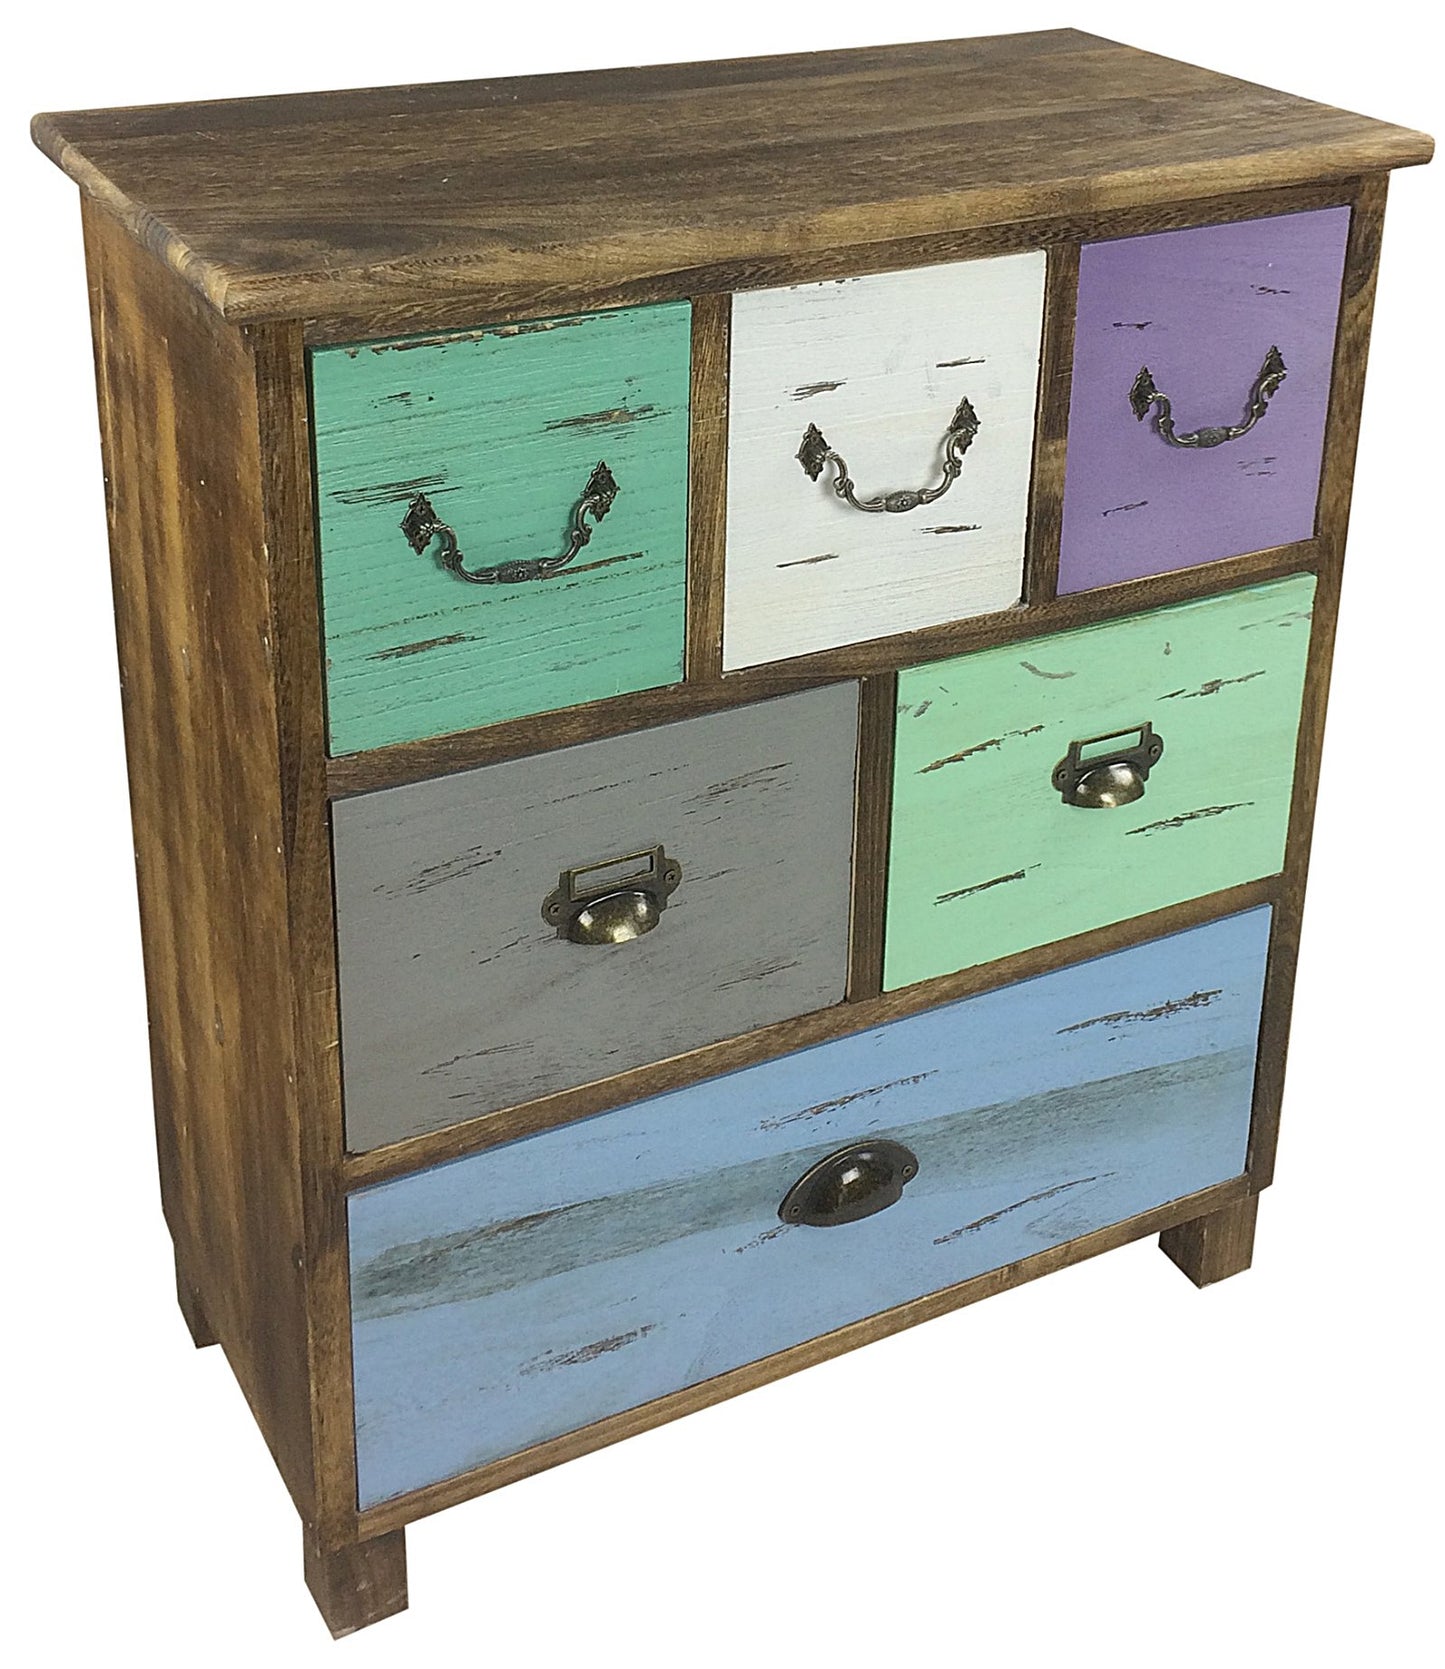 6 Drawer Wooden Storage Cabinet 69cm - Available in UK Only